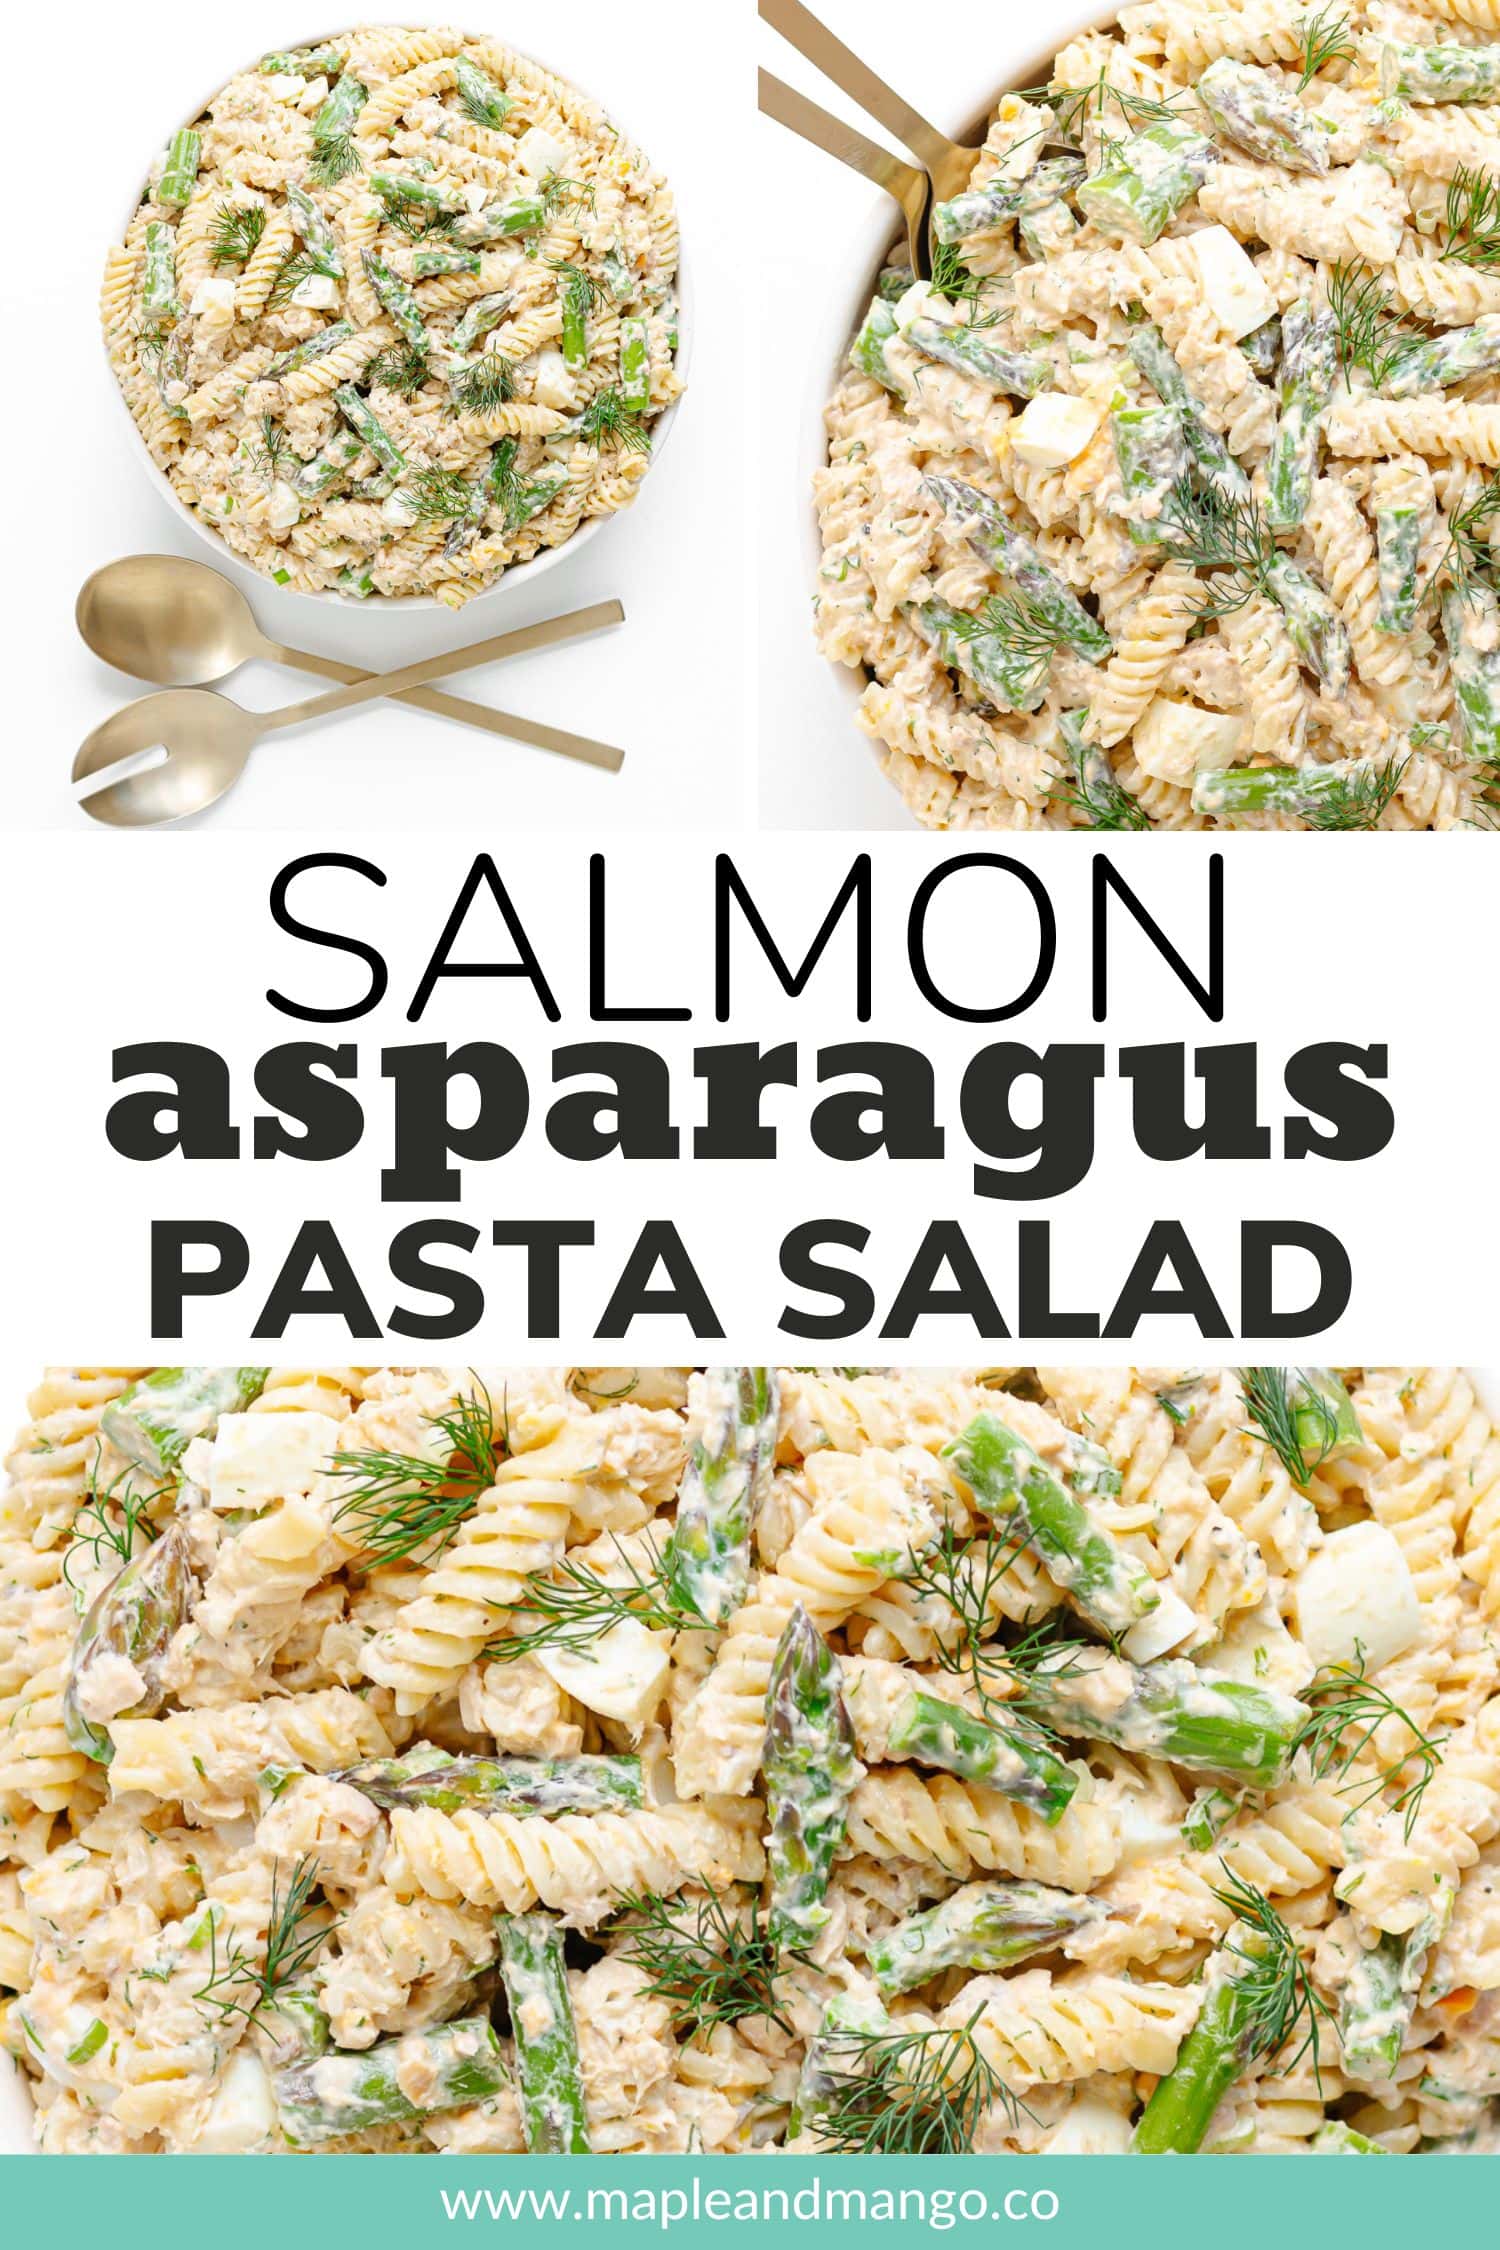 Photo collage graphic showing various pictures of a pasta salad with text overlay "Salmon Asparagus Pasta Salad".